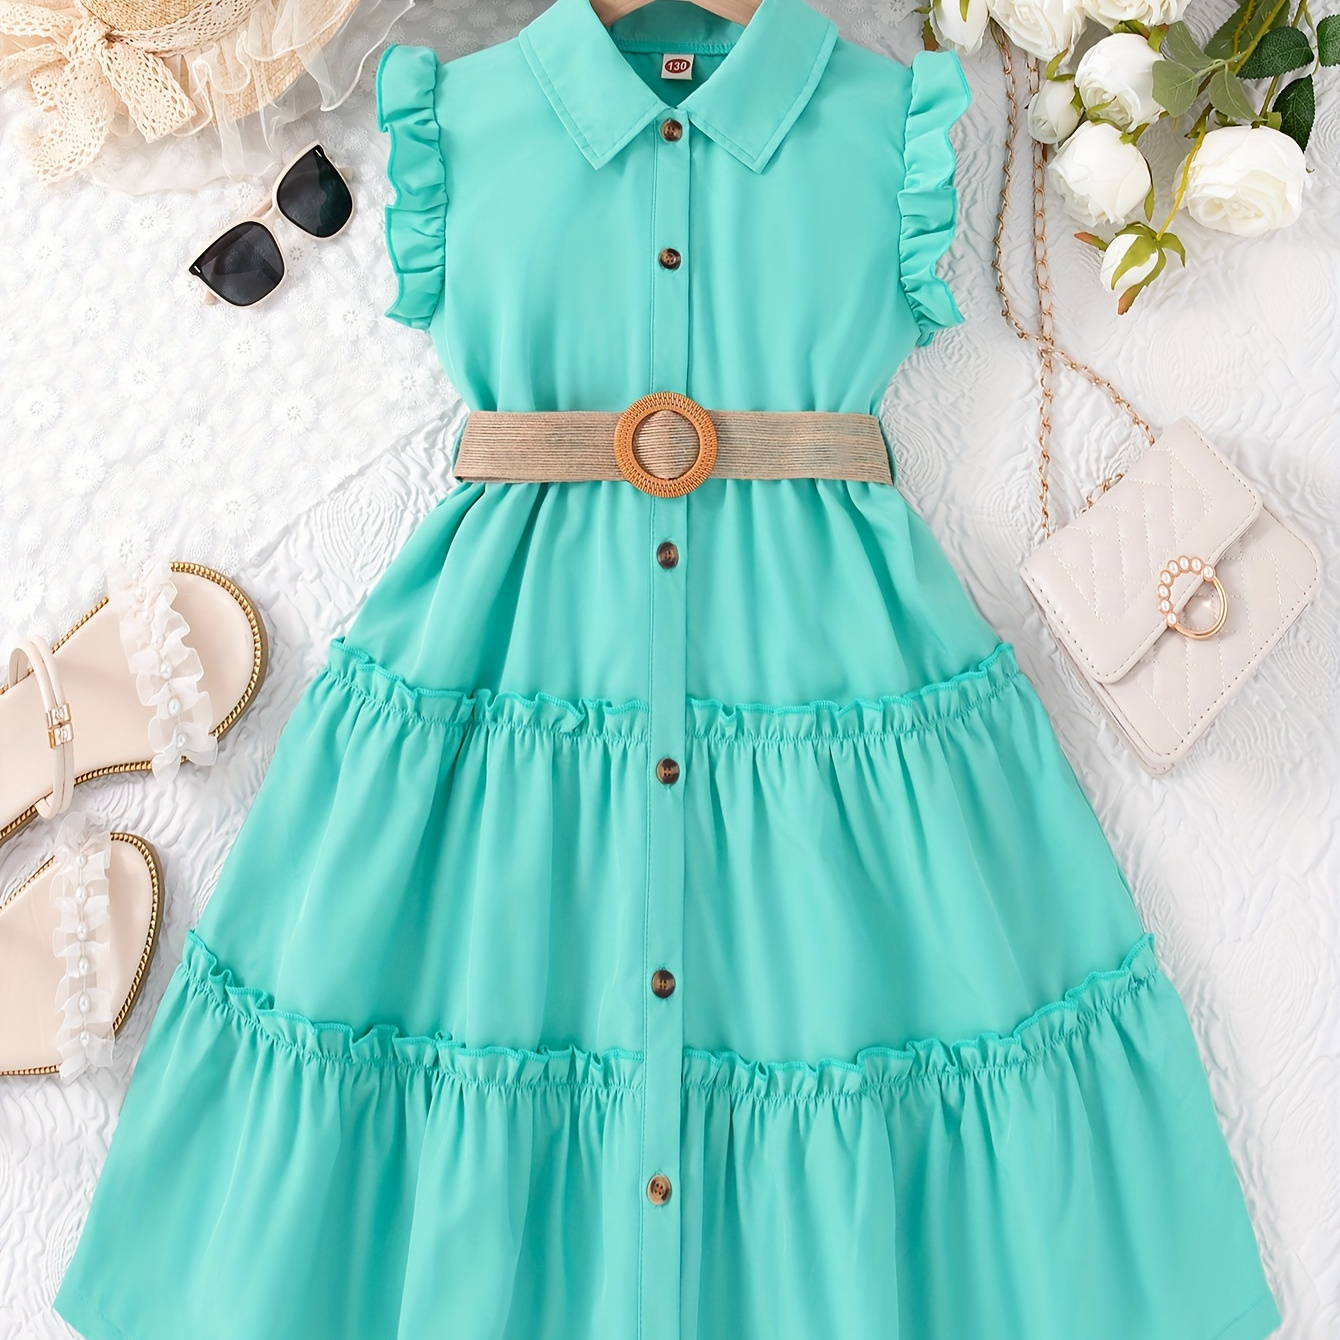 

Girls Elegant Button Up Frill Sleeveless Dress Regular Fit Mid-length Party Vacation Dress With Belt